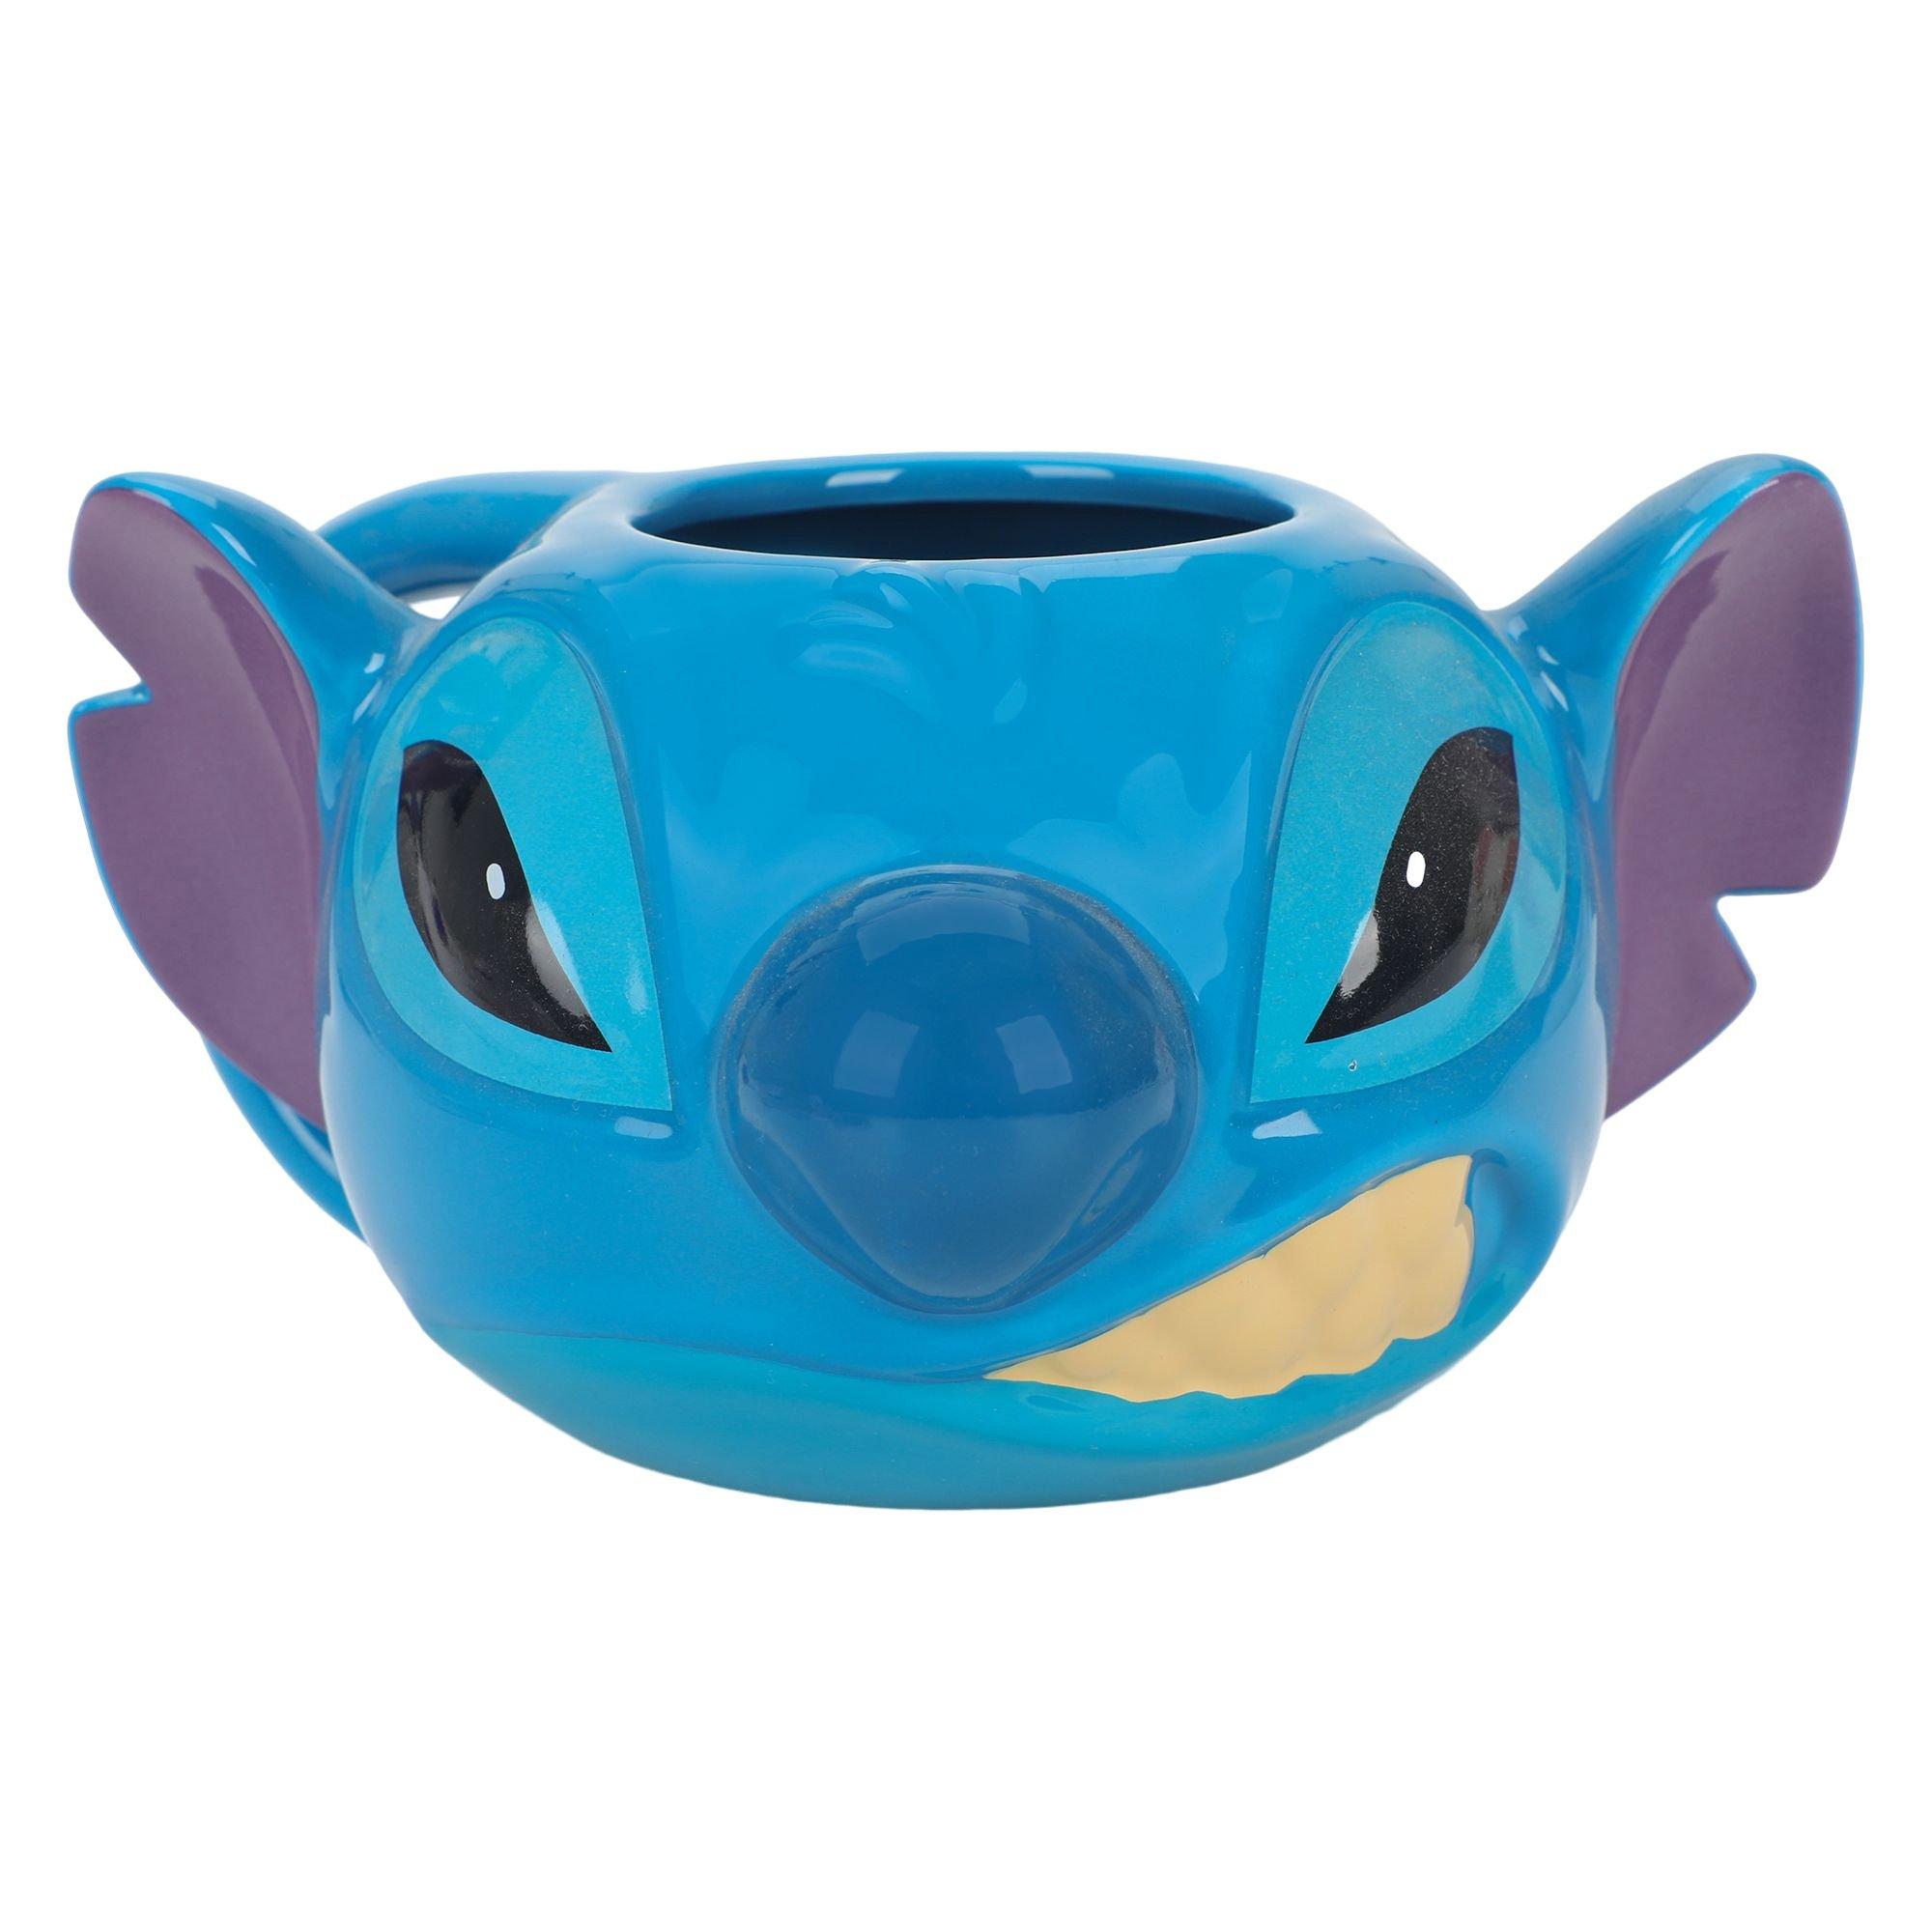  Disney Stitch Figural Character Mug Kitchen Accessories, Cute  Ceramic Housewarming Gifts For Men And Women And Kids, Official Licensee